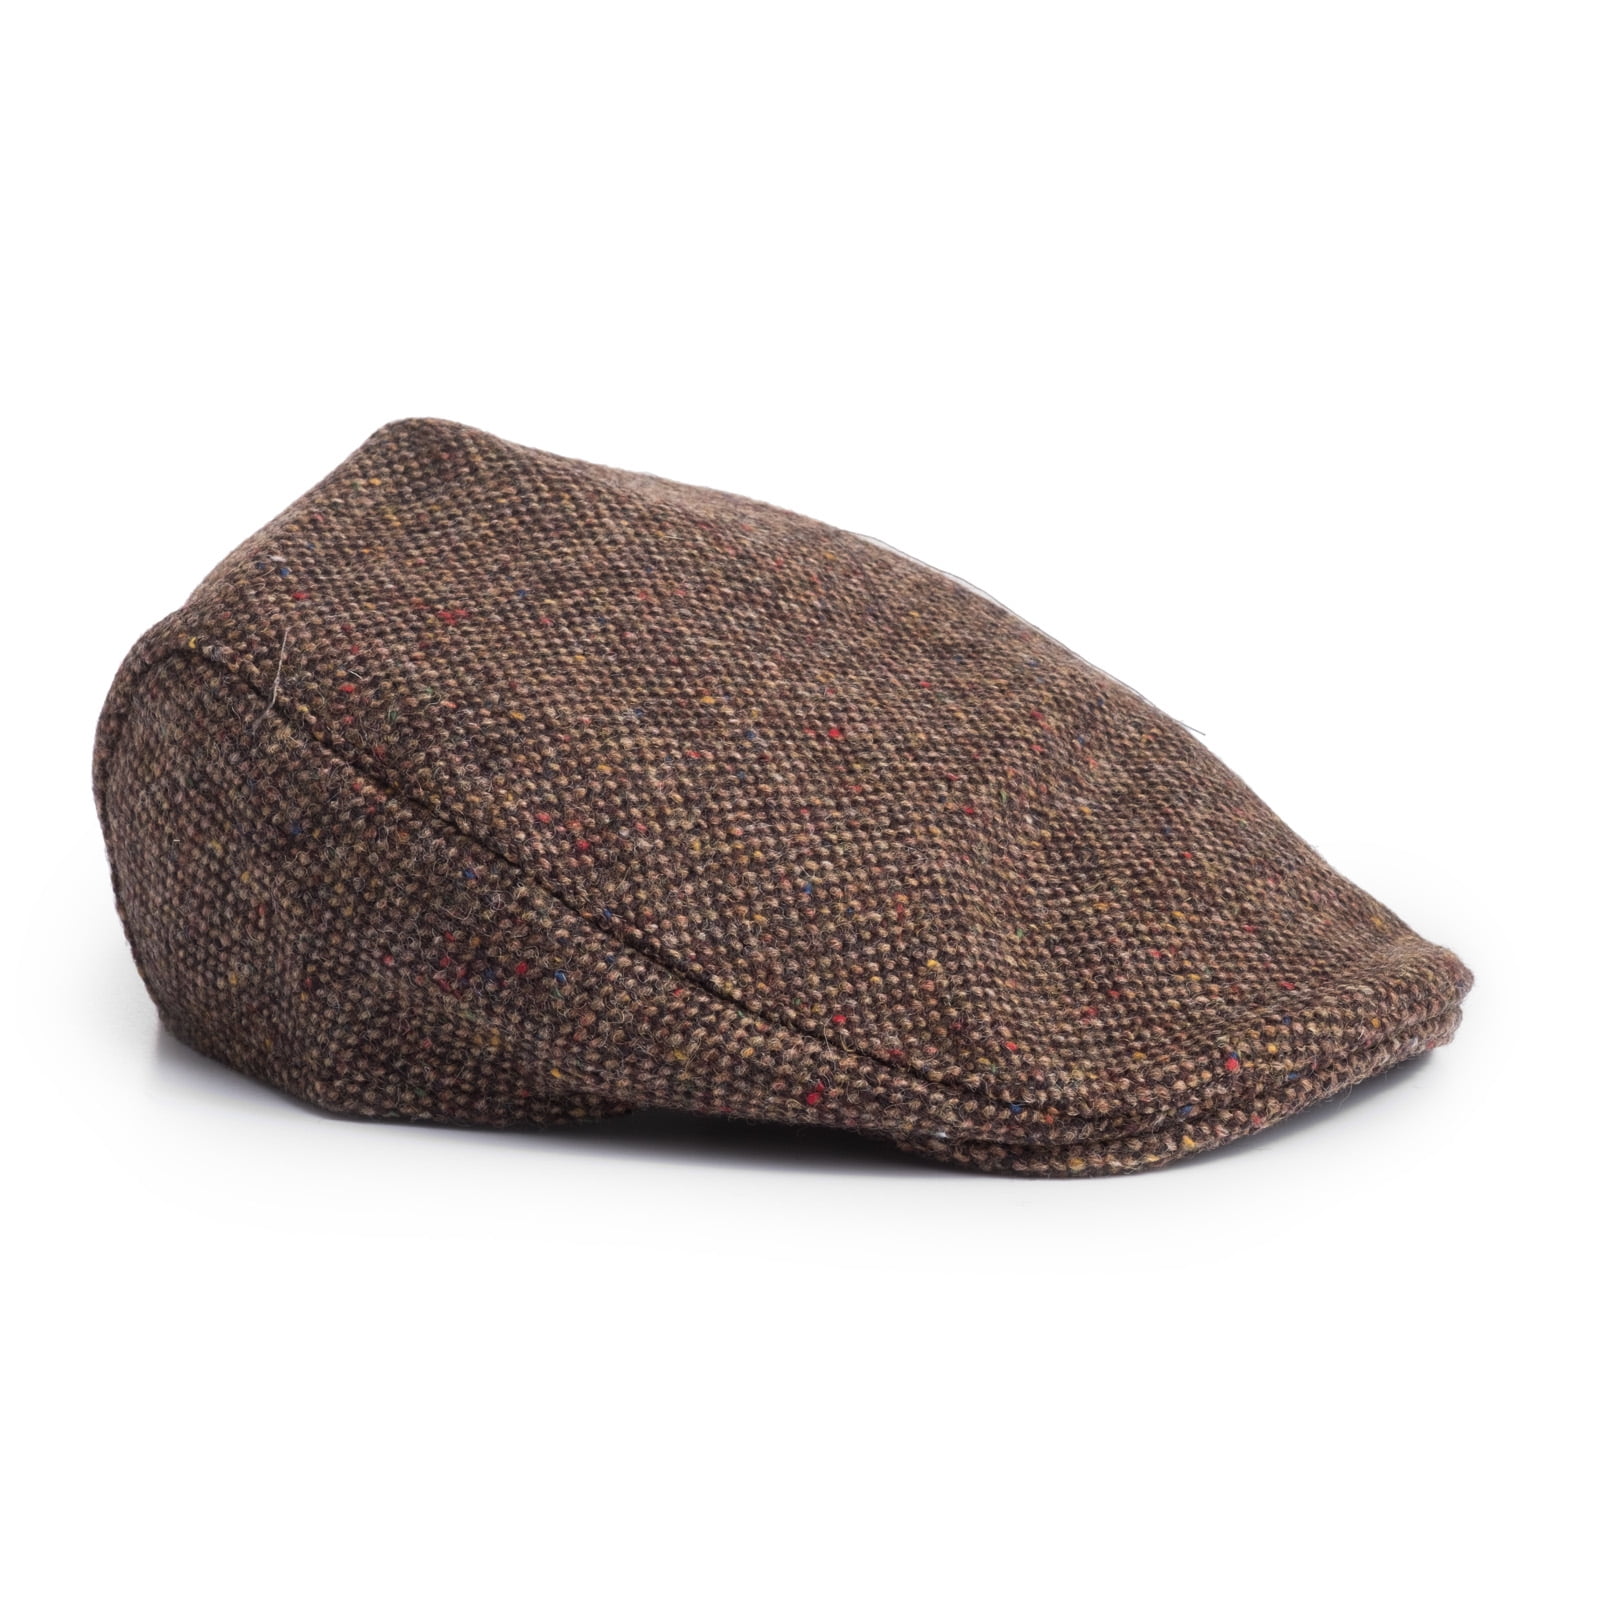 Great Horse Boys Wool Blend Traditional Tweed Country Style Flat Cap 3-8 Years 